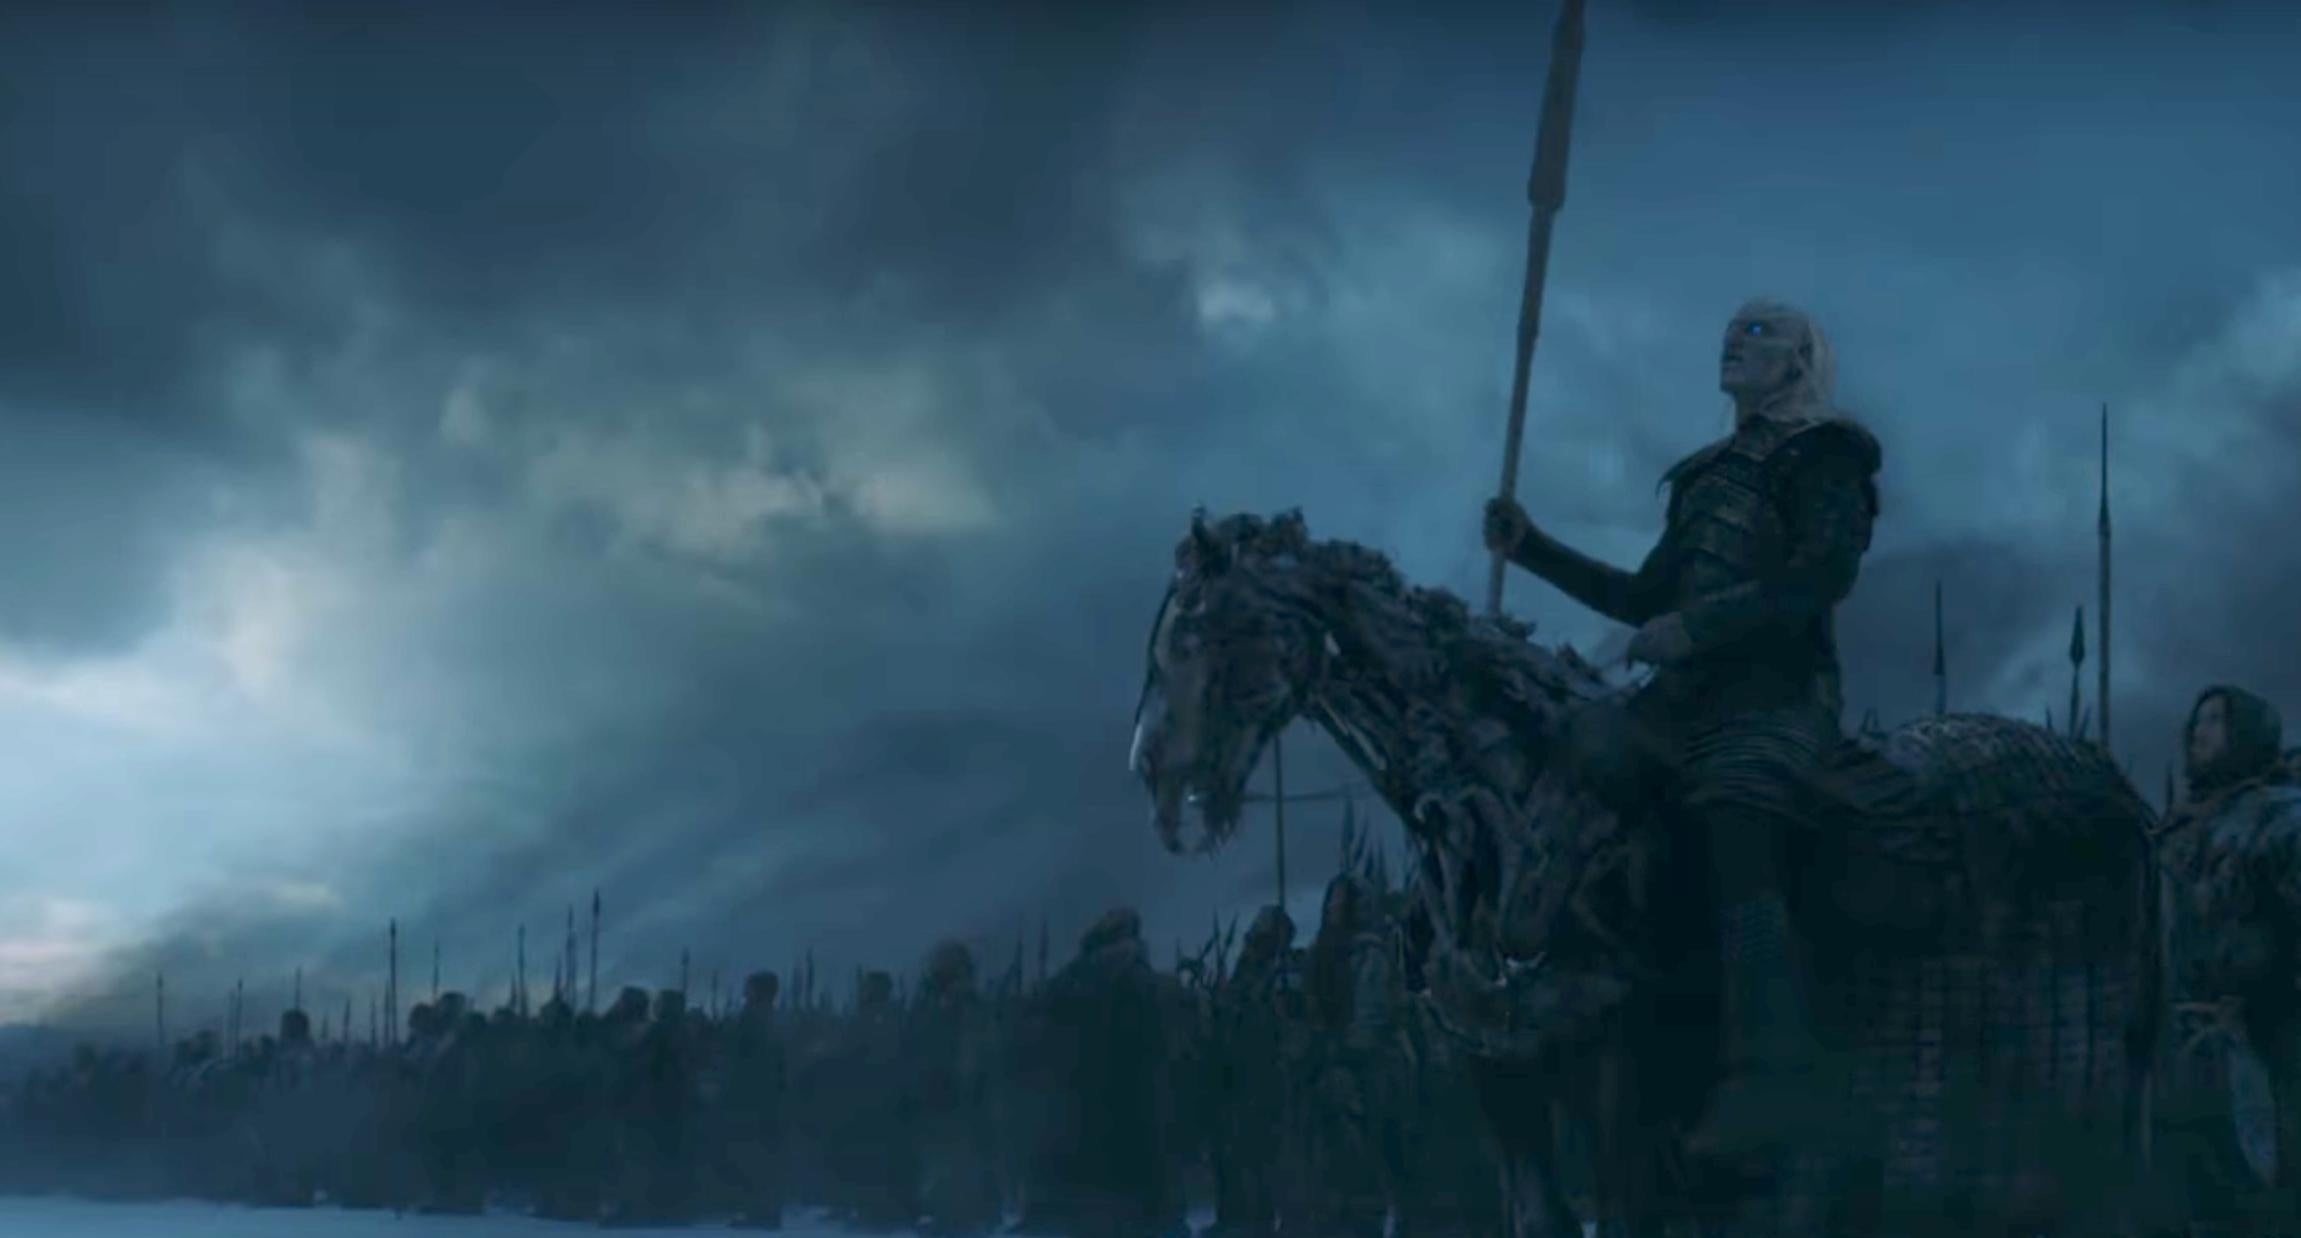 give på den anden side, ekstremister Game of Thrones season 7 finale: White Walkers scene showed undead army in  wolf-shaped formation | The Independent | The Independent